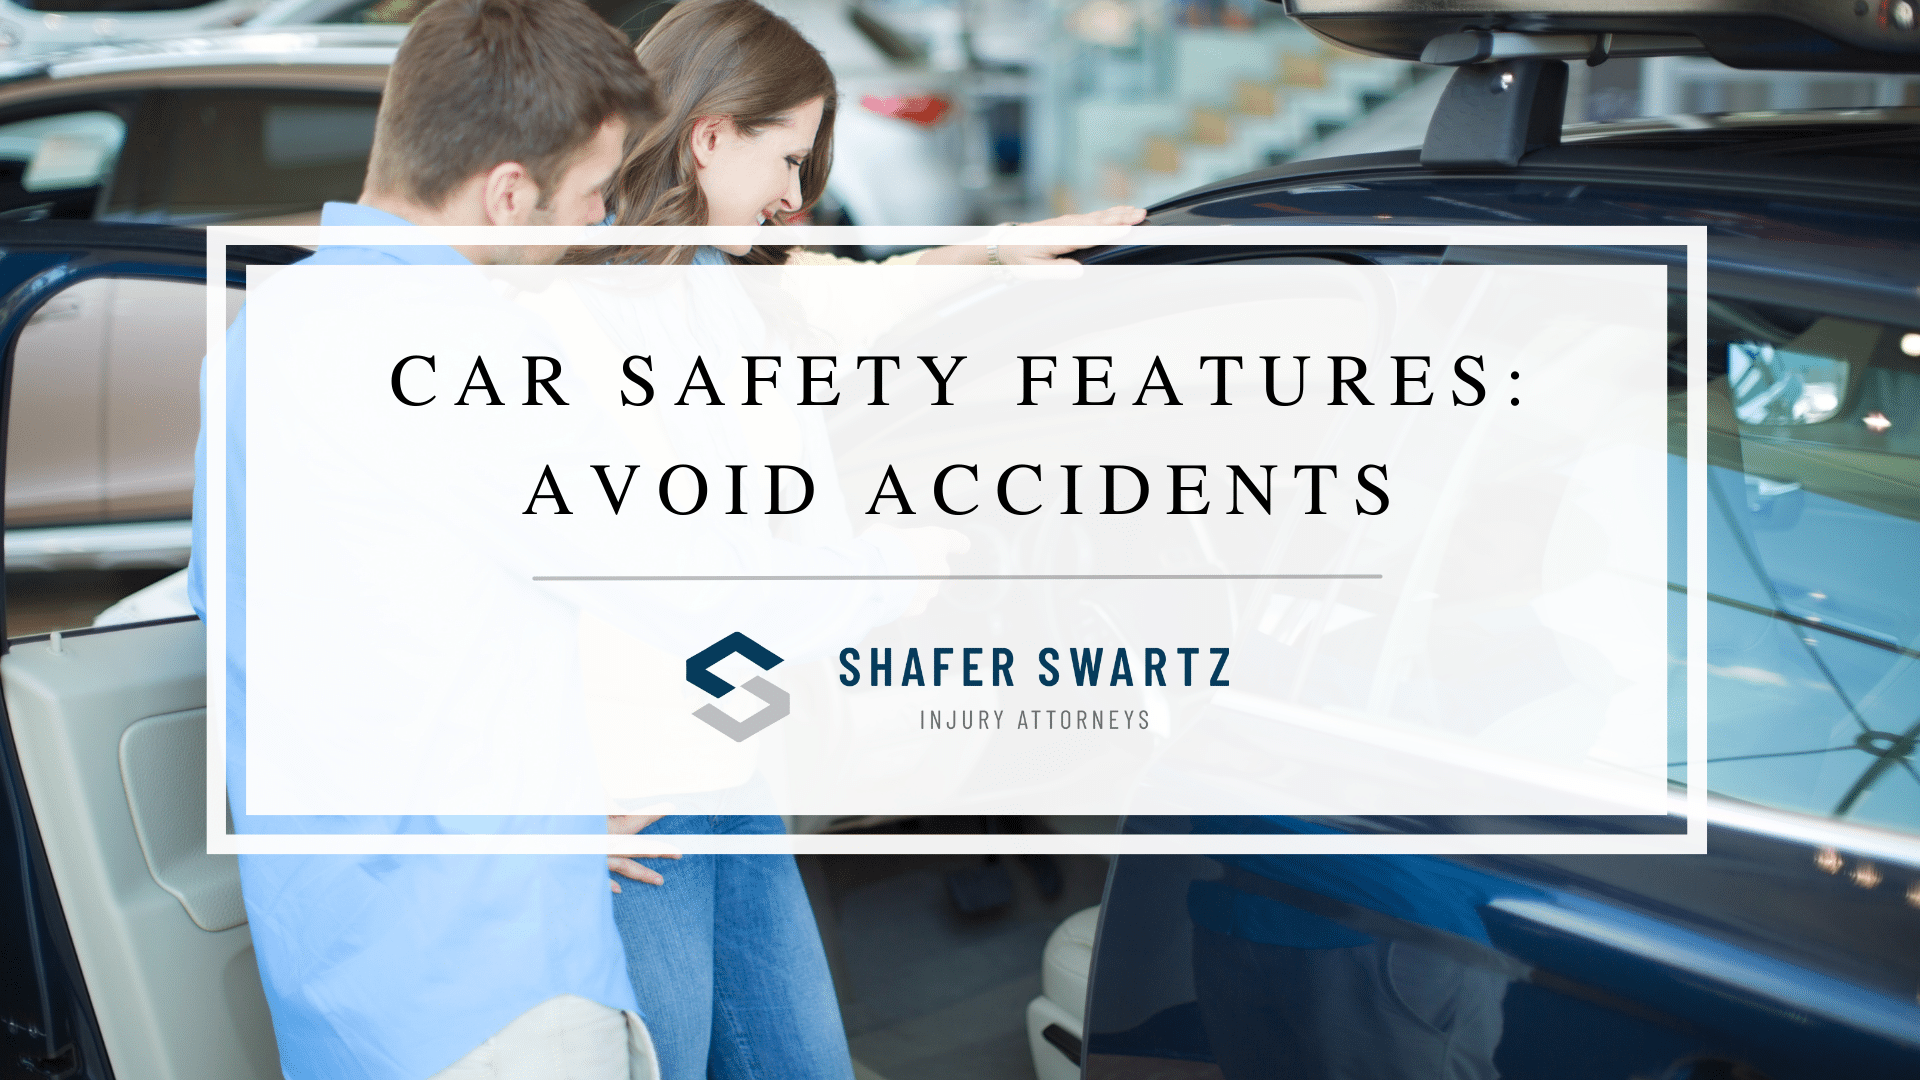 Featured image of the car safety features help you avoid accidents